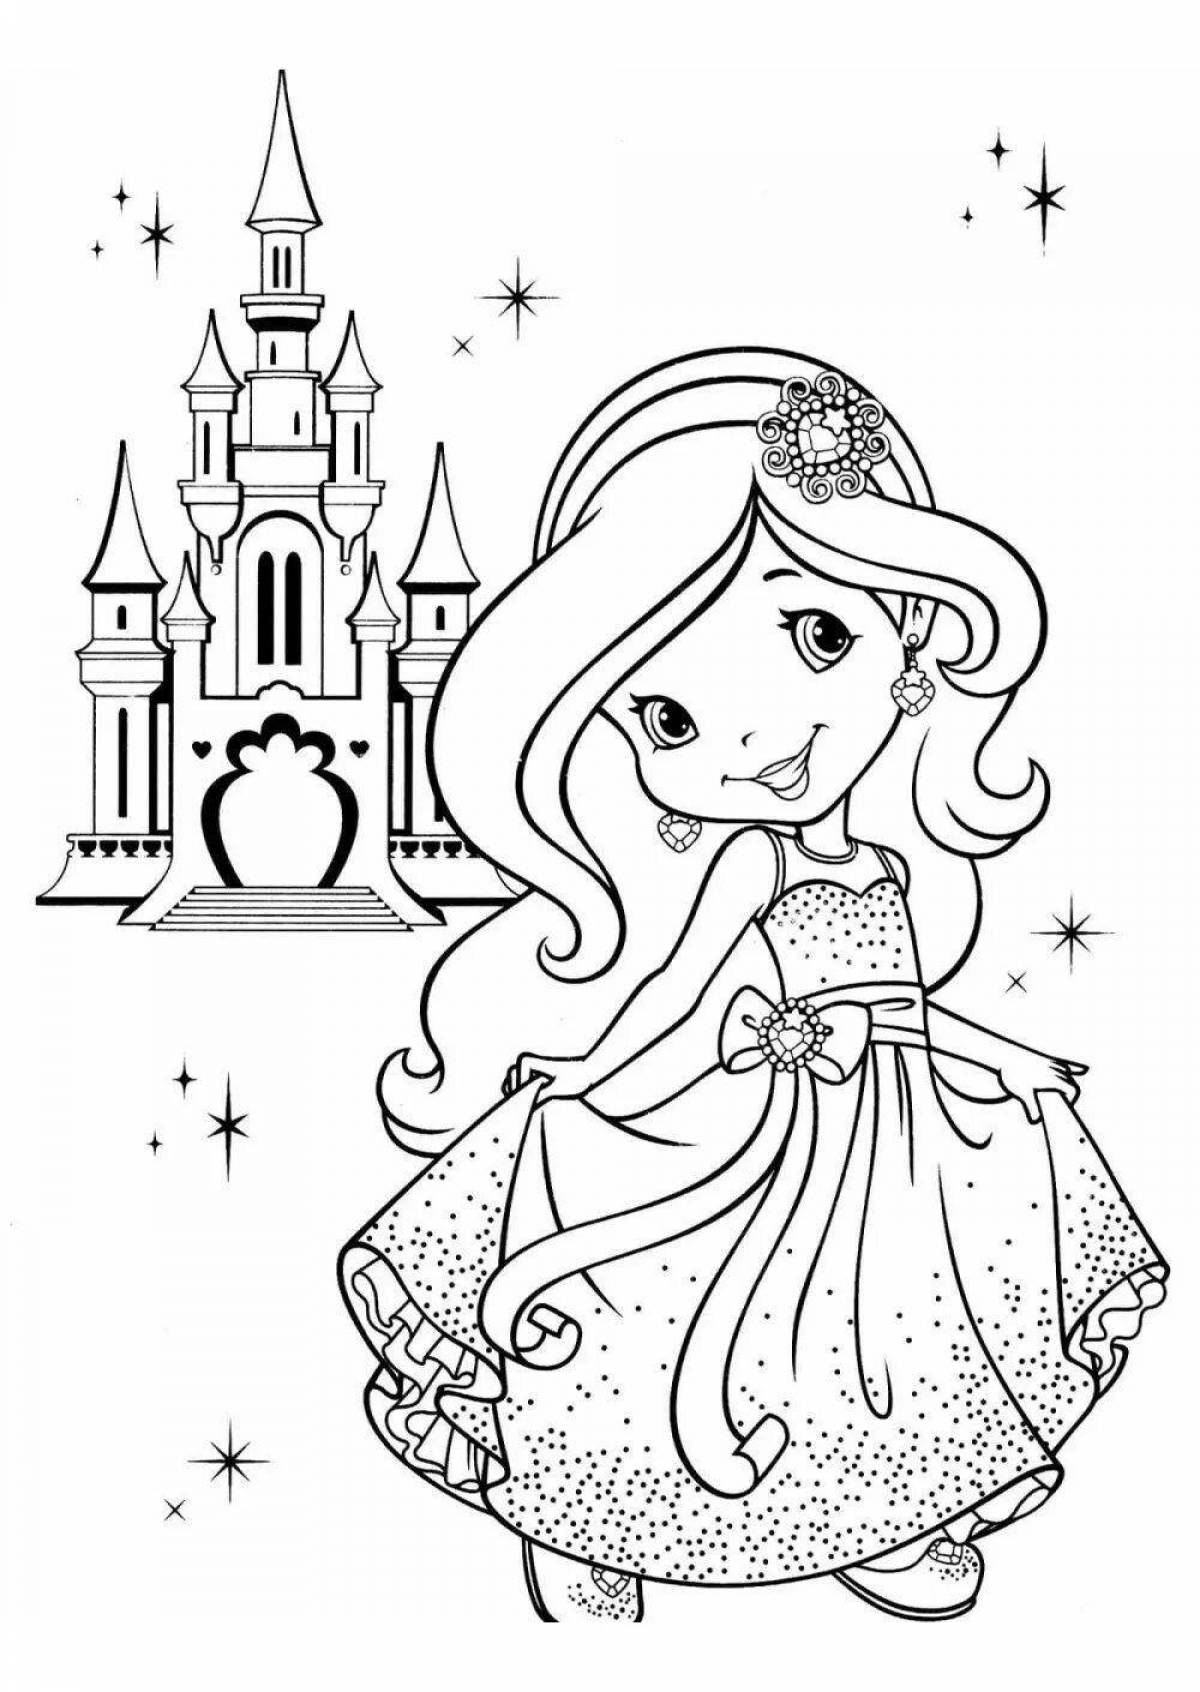 Radiant coloring page princess games for girls